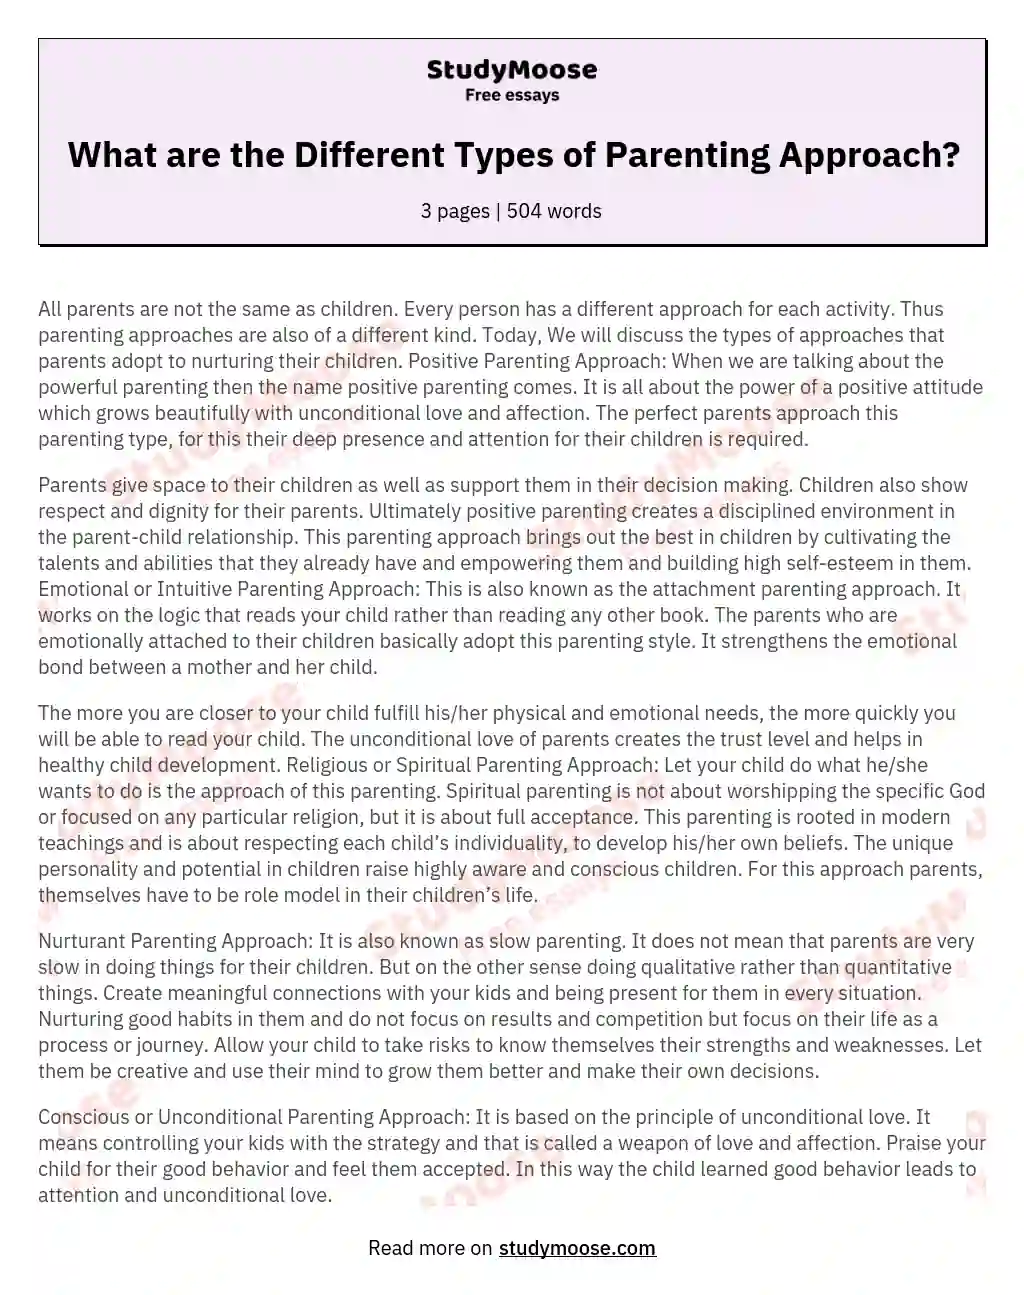 essay about parenting styles